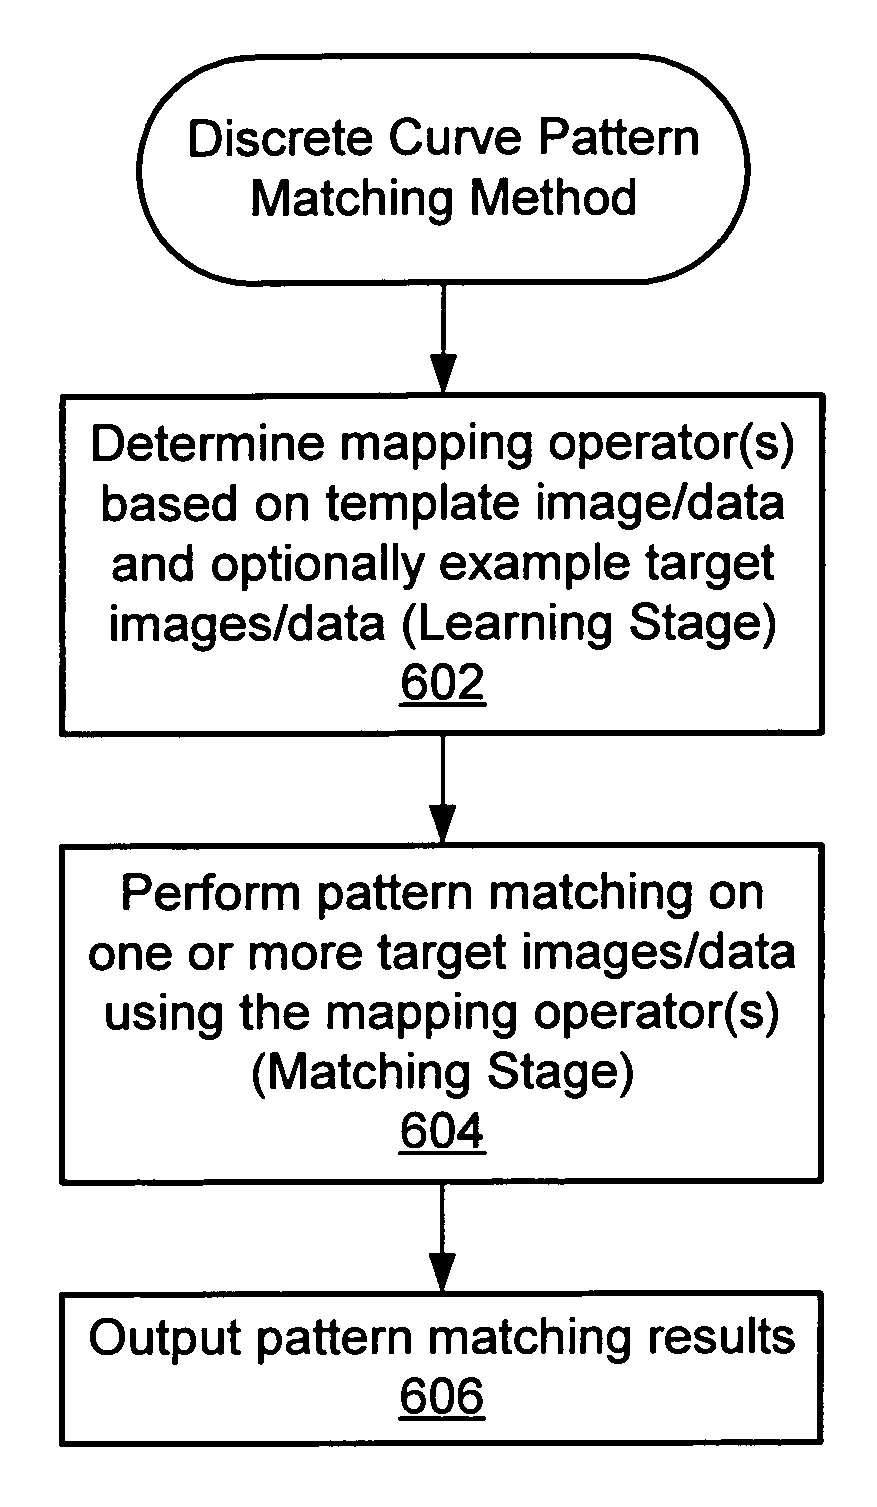 Pattern matching utilizing discrete curve matching with multiple mapping operators